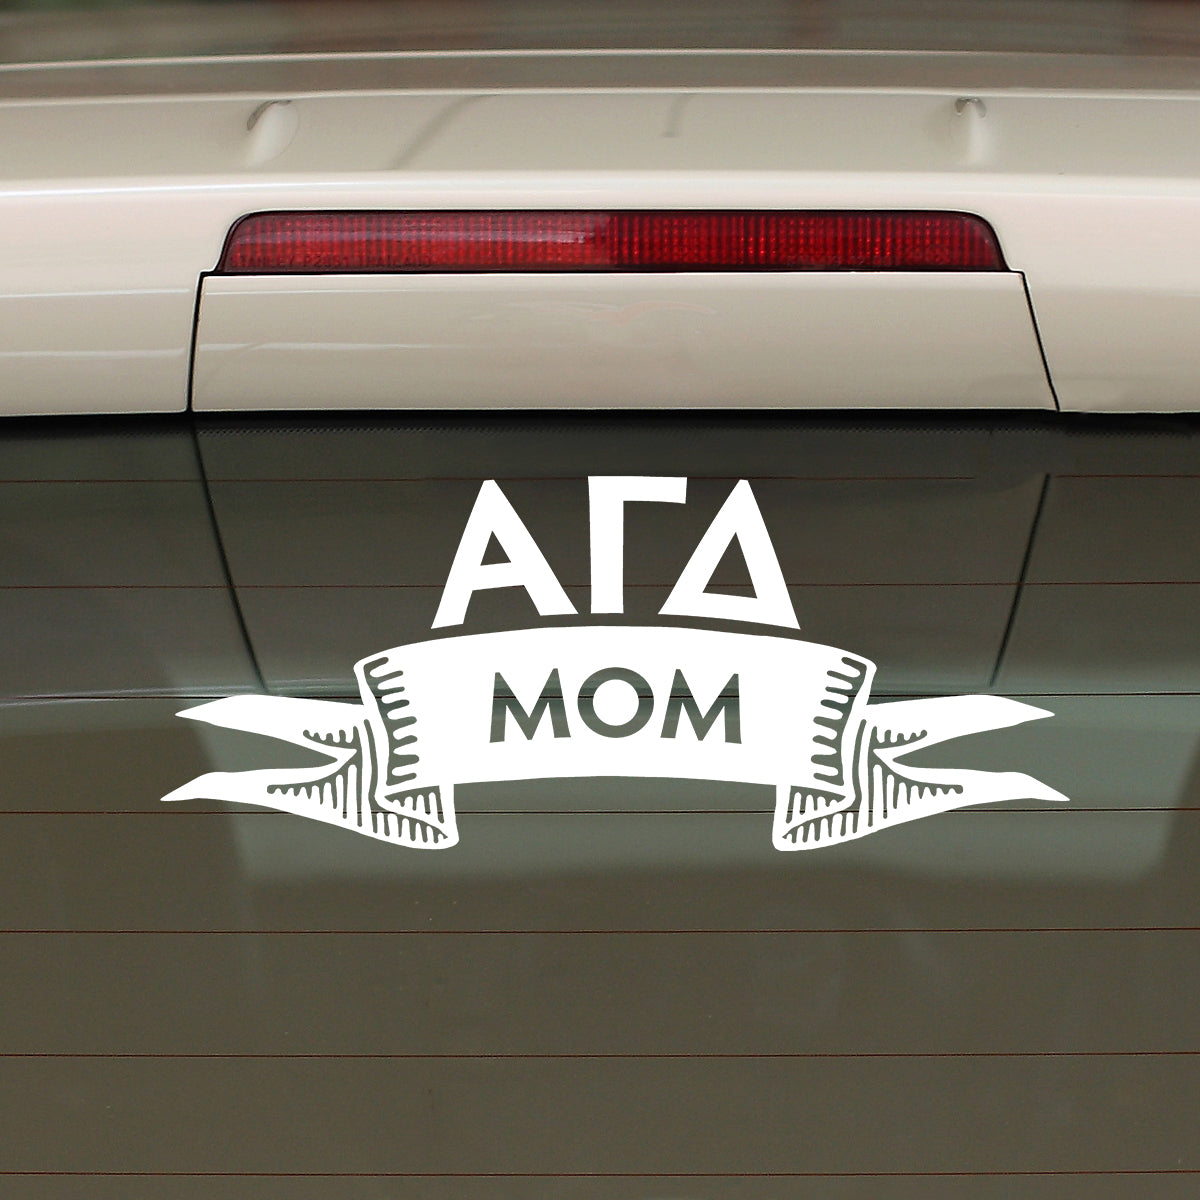 Alpha Gamma Delta Mom Gift Pack | Brit and Bee